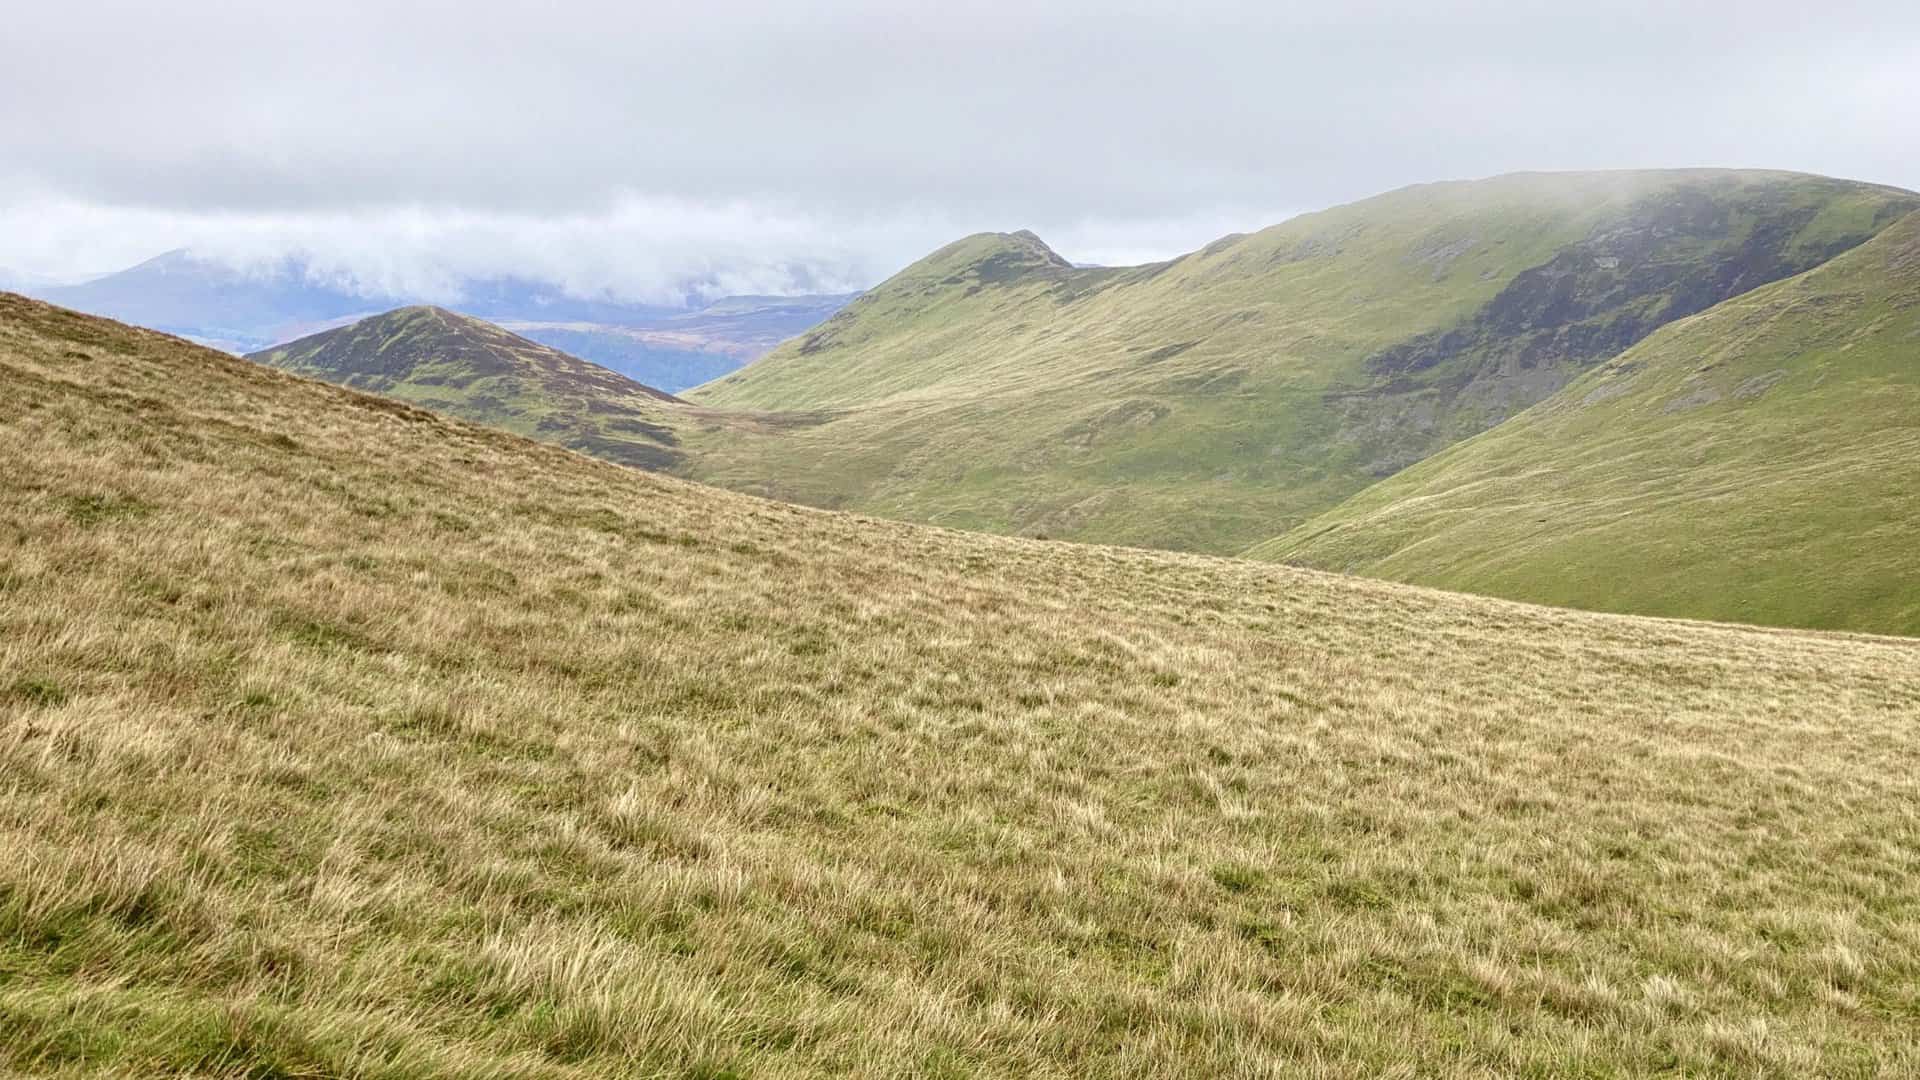 Looking east from Coledale Hause. The pointed peaks are Causey Pike (right) and Outerside (left).